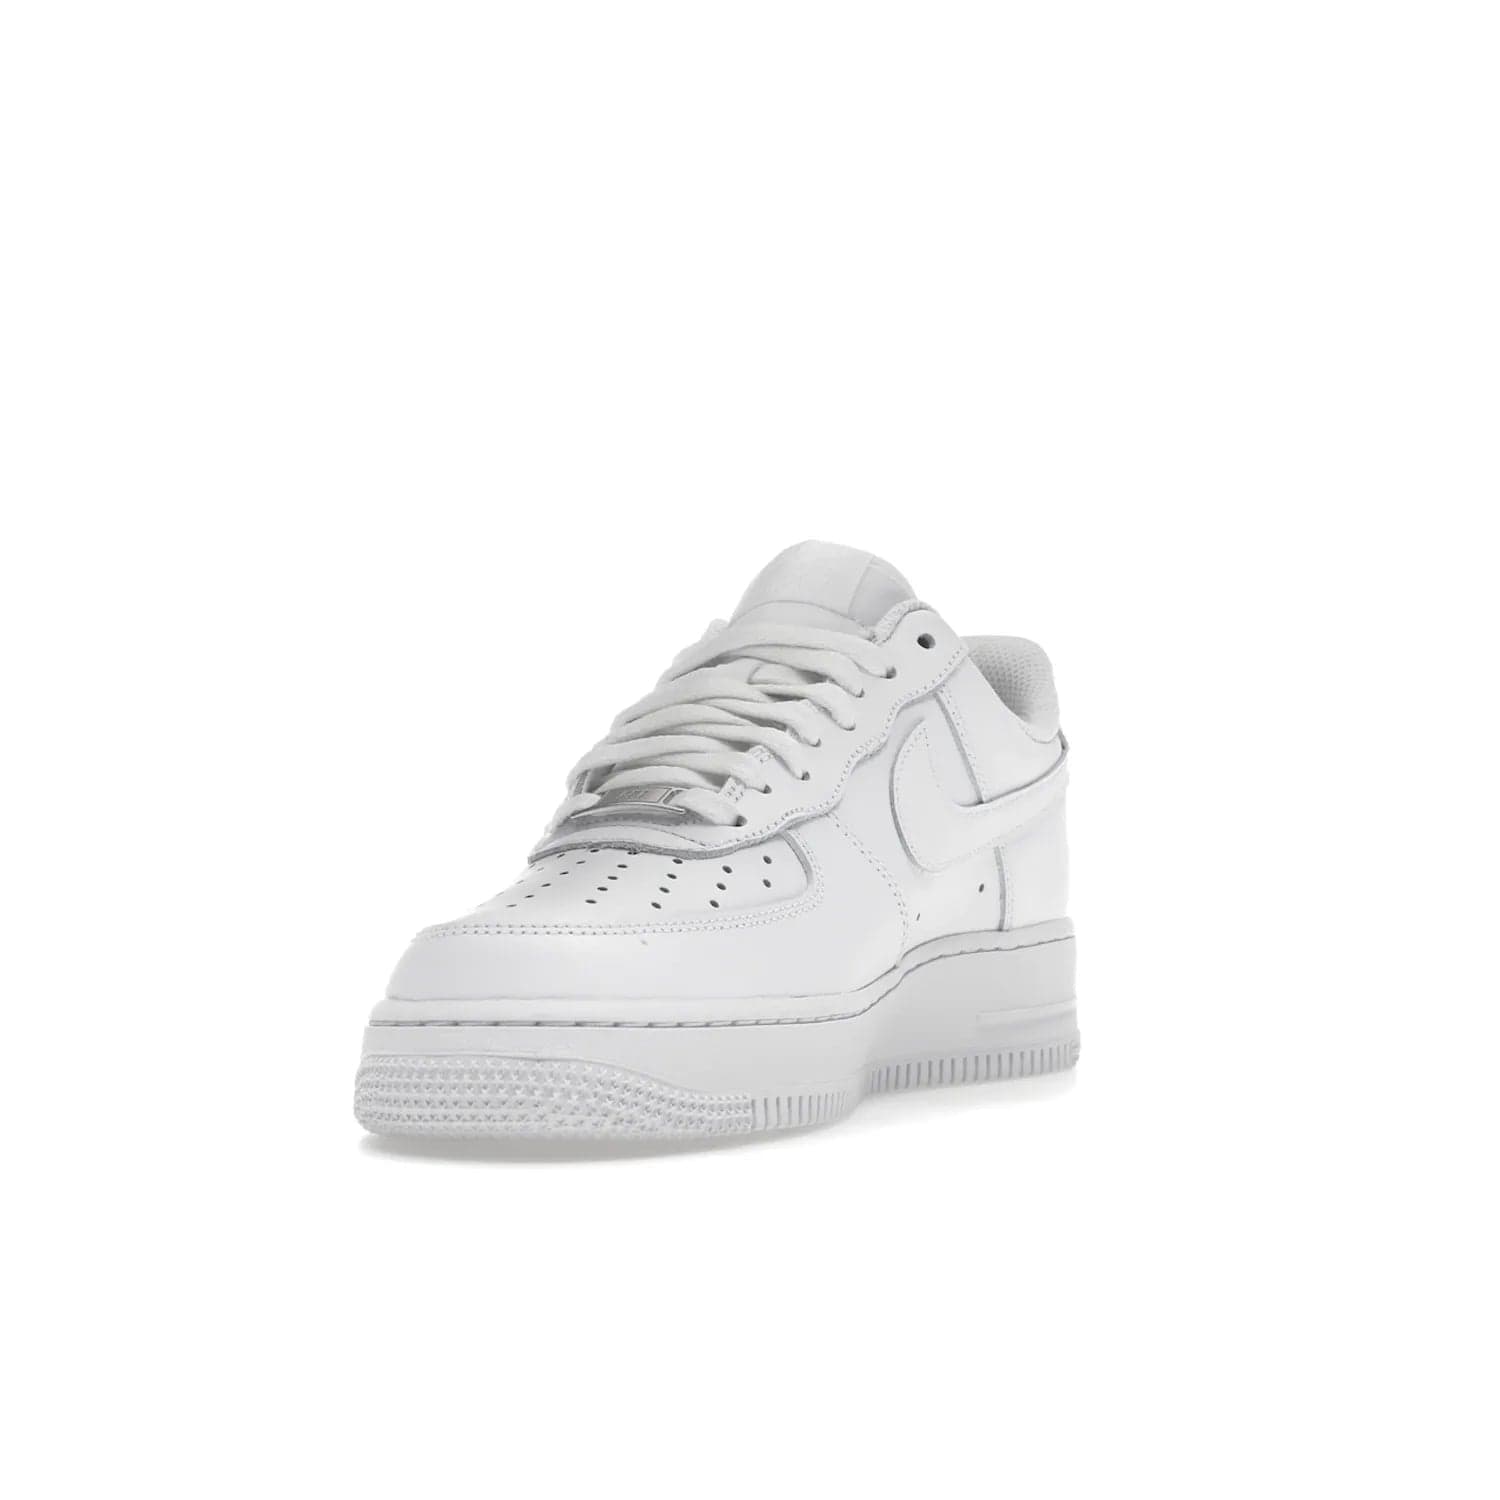 Nike Air Force 1 Low '07 White (Women's) - Image 13 - Only at www.BallersClubKickz.com - Timeless classic sneaker updated with white leather upper and perforated toe box. Nike heel embroidery and white sole. Released January 2018.